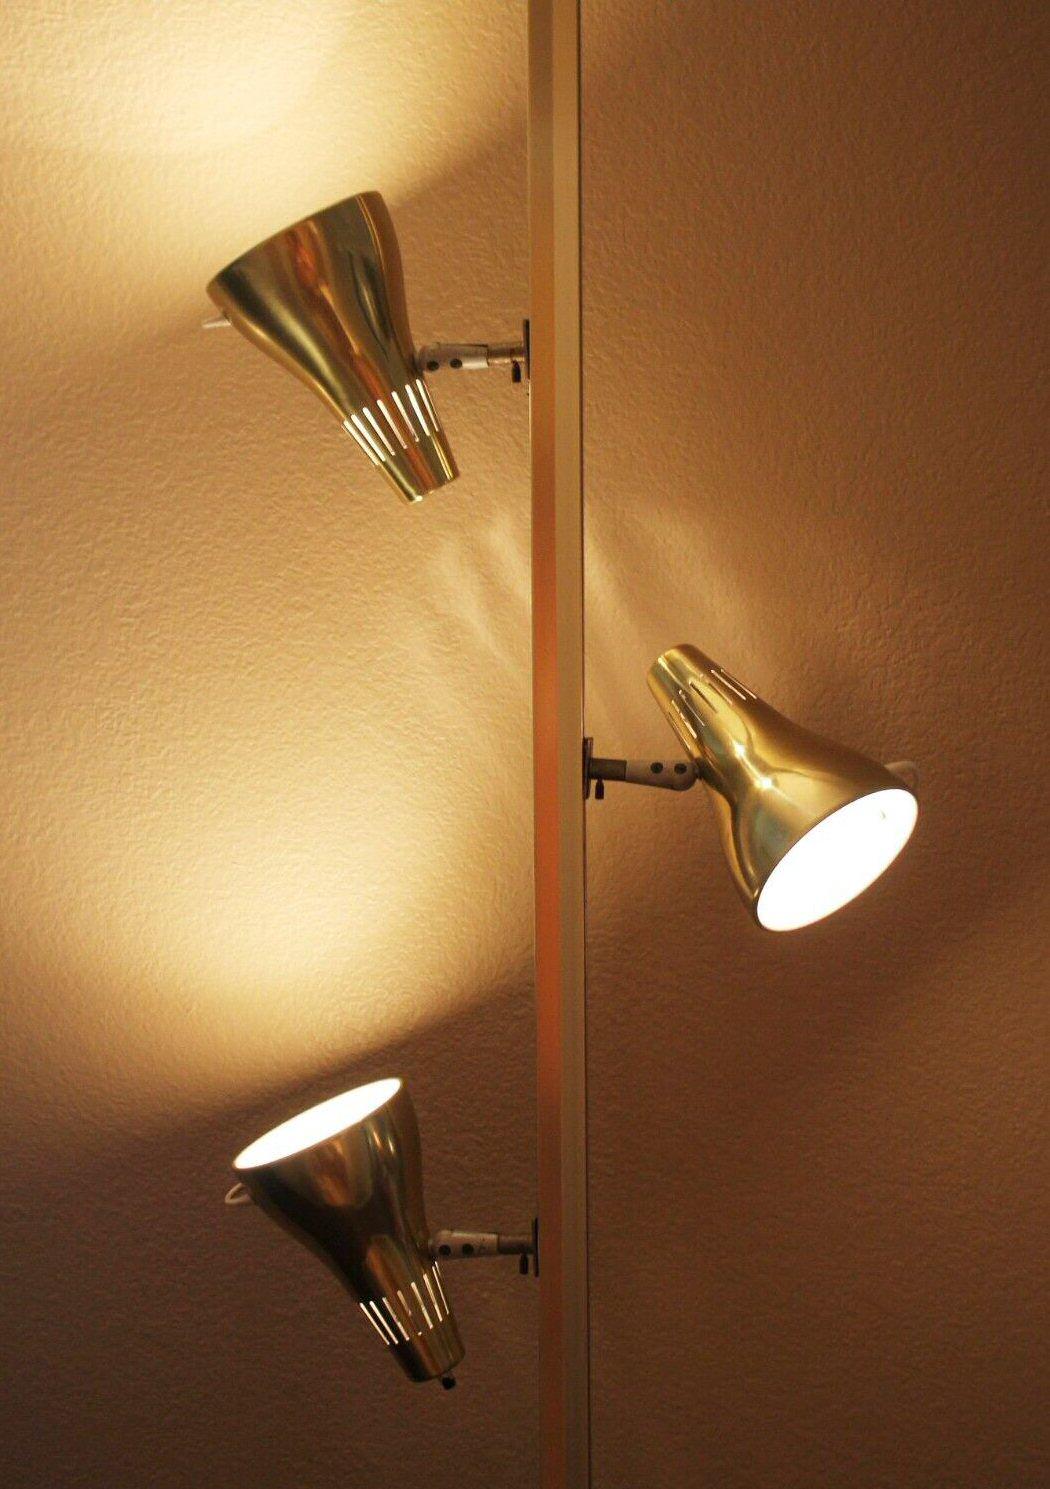 MONUMENTAL!


LIGHTOLIER
MID CENTURY MODERN
LYTESPAN 1959
TENSION POLE LAMP!


ICONIC 3 GOLD SHADES WITH HANDLES!
FITS 8 FT. CEILING


This is both an iconic & gorgeous Lightolier atomic age tension pole lamp! It is a gleaming tower of mid century